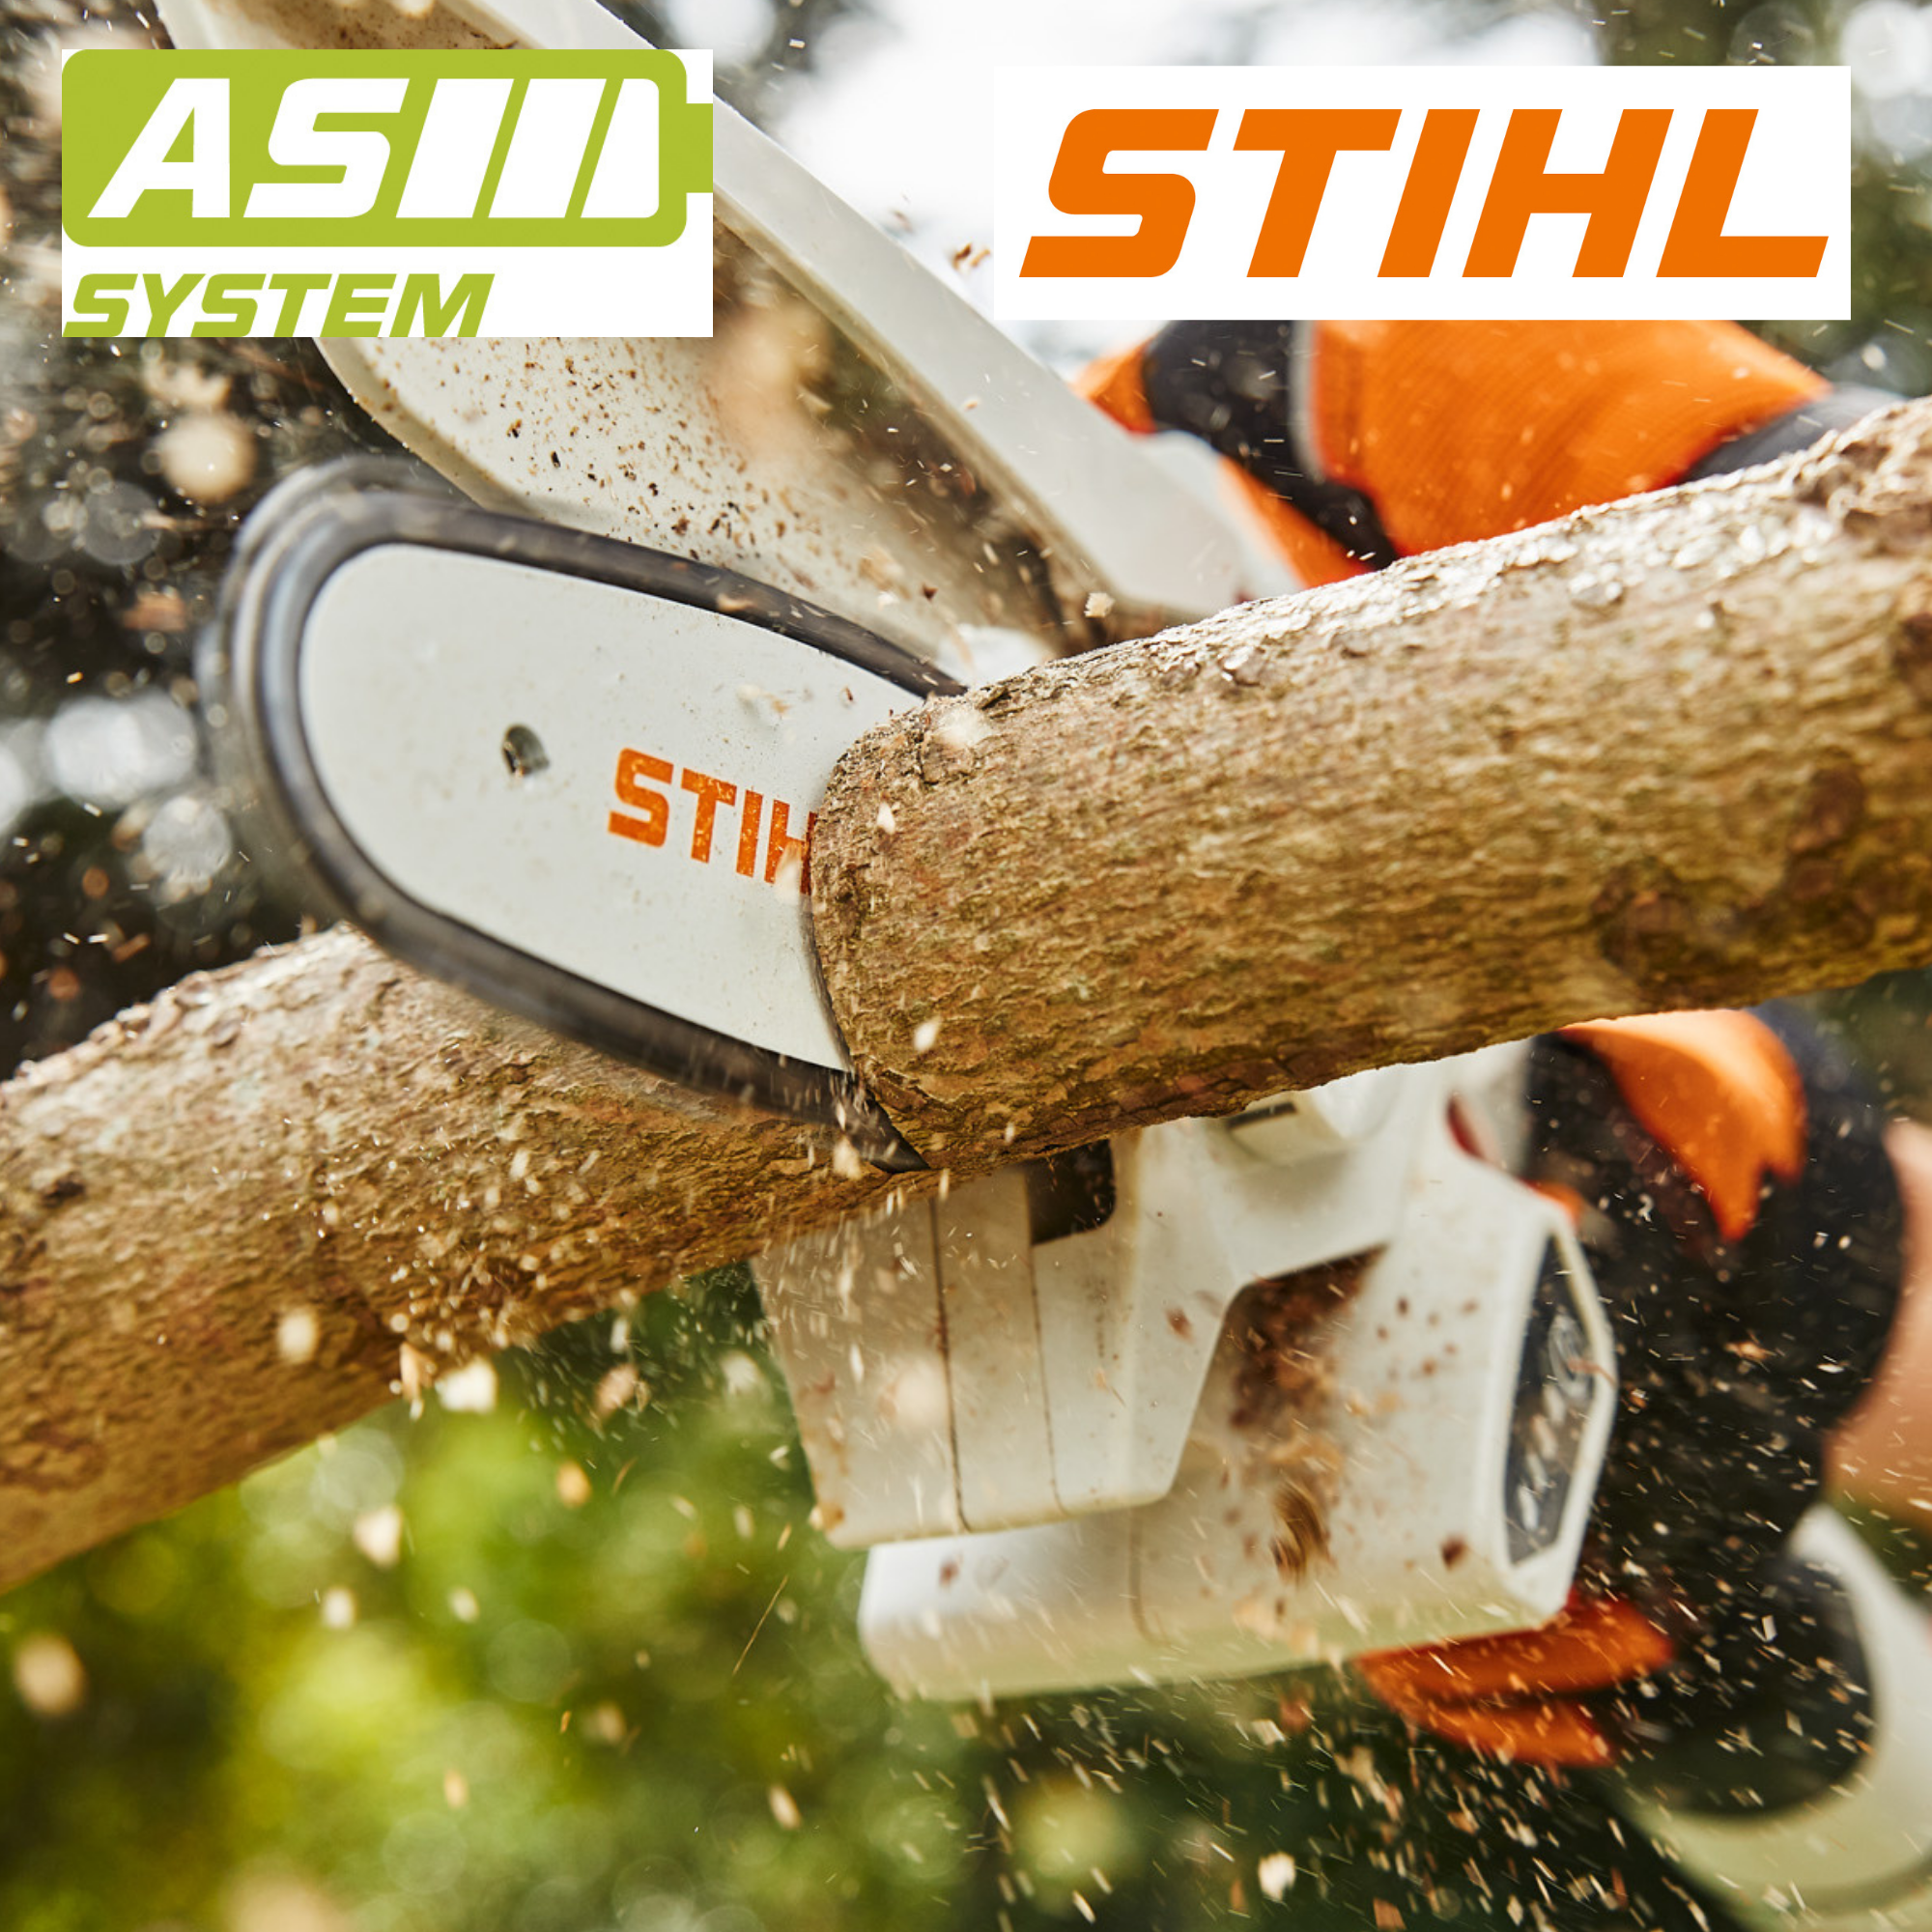 THE STIHL AS SYSTEM – CORDLESS TOOLS FOR GARDEN CHALLENGES